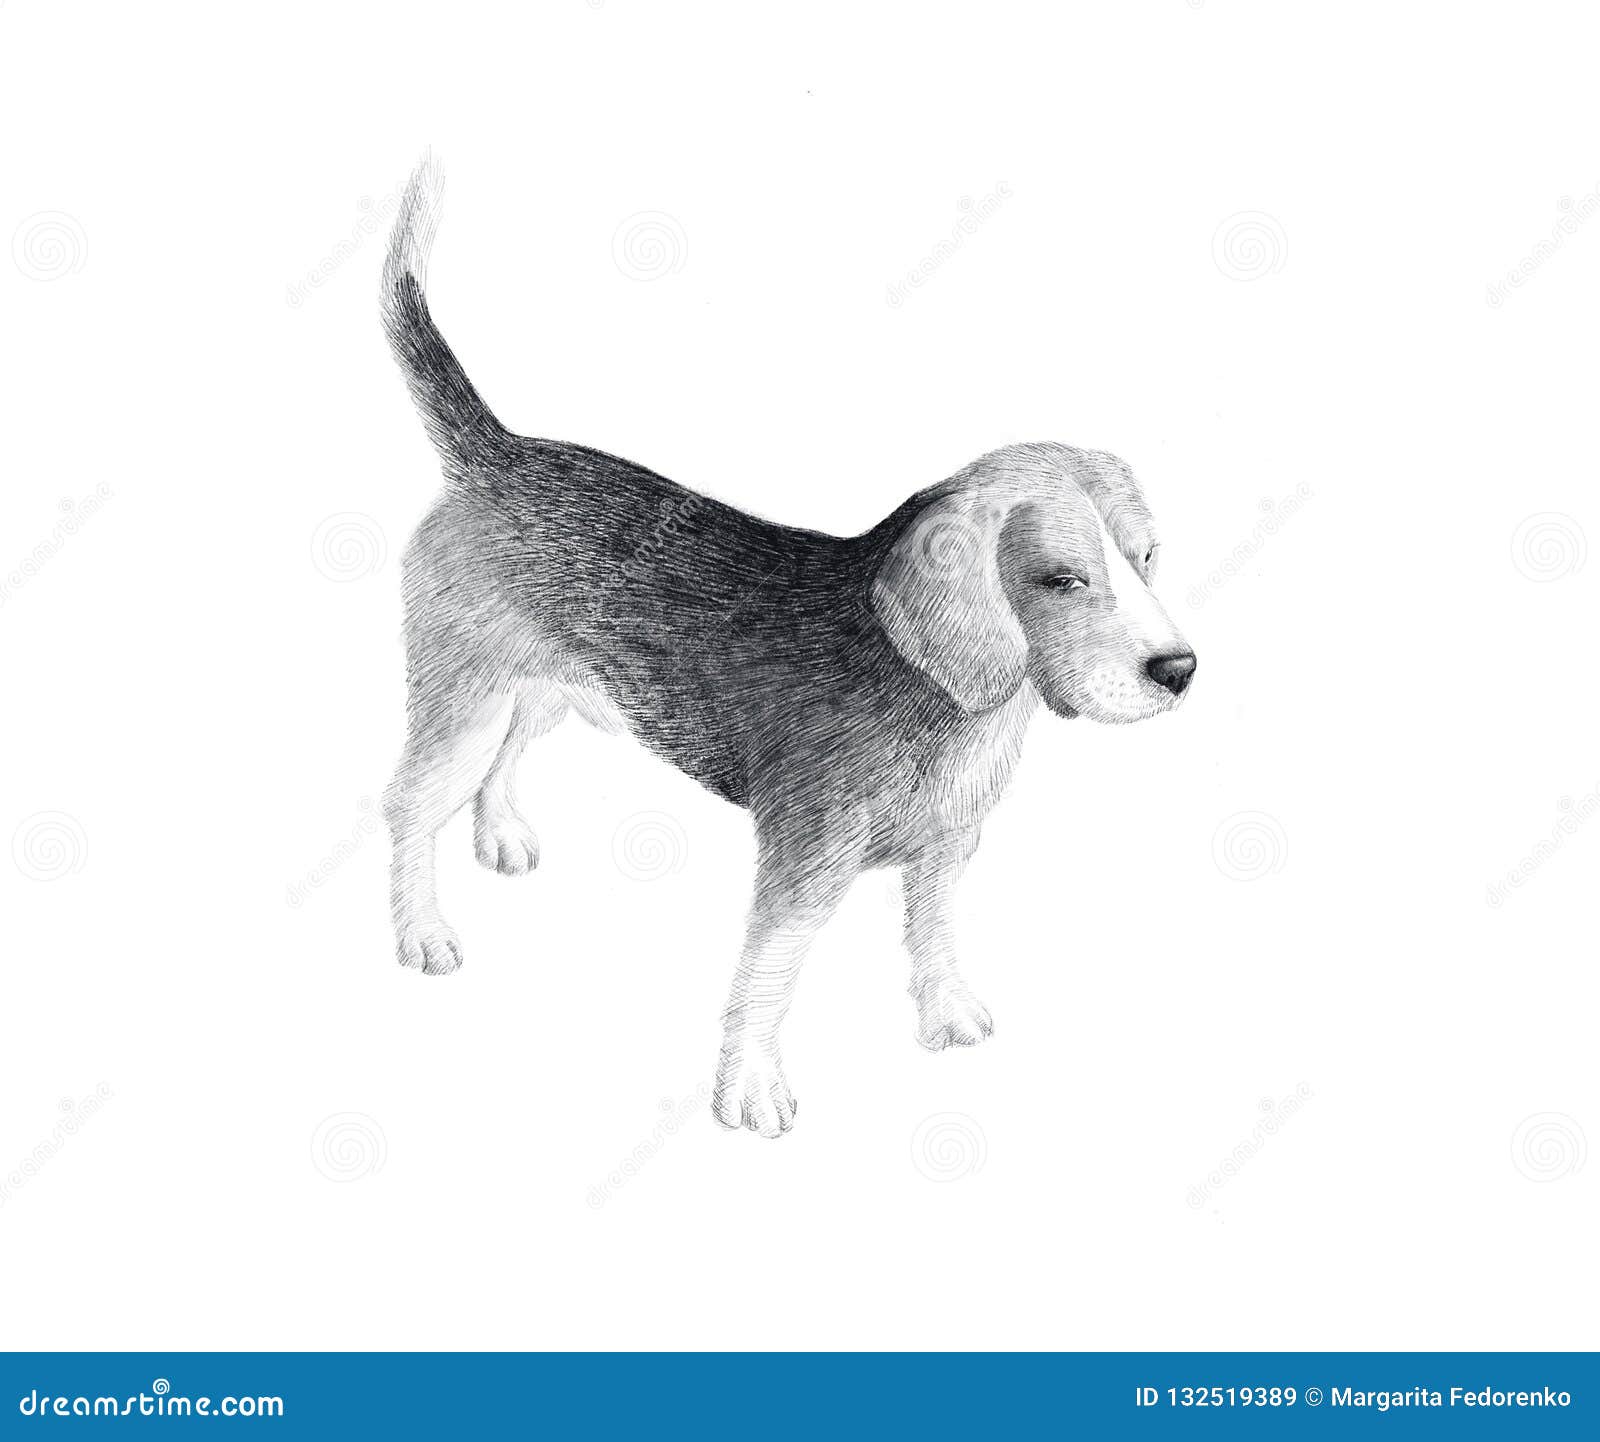 Little Dog Breed Beagle Sketch Graphics Black And White Drawing Hand Drawn Dog Doodle Stock Image Image Of Portrait Decorative 132519389